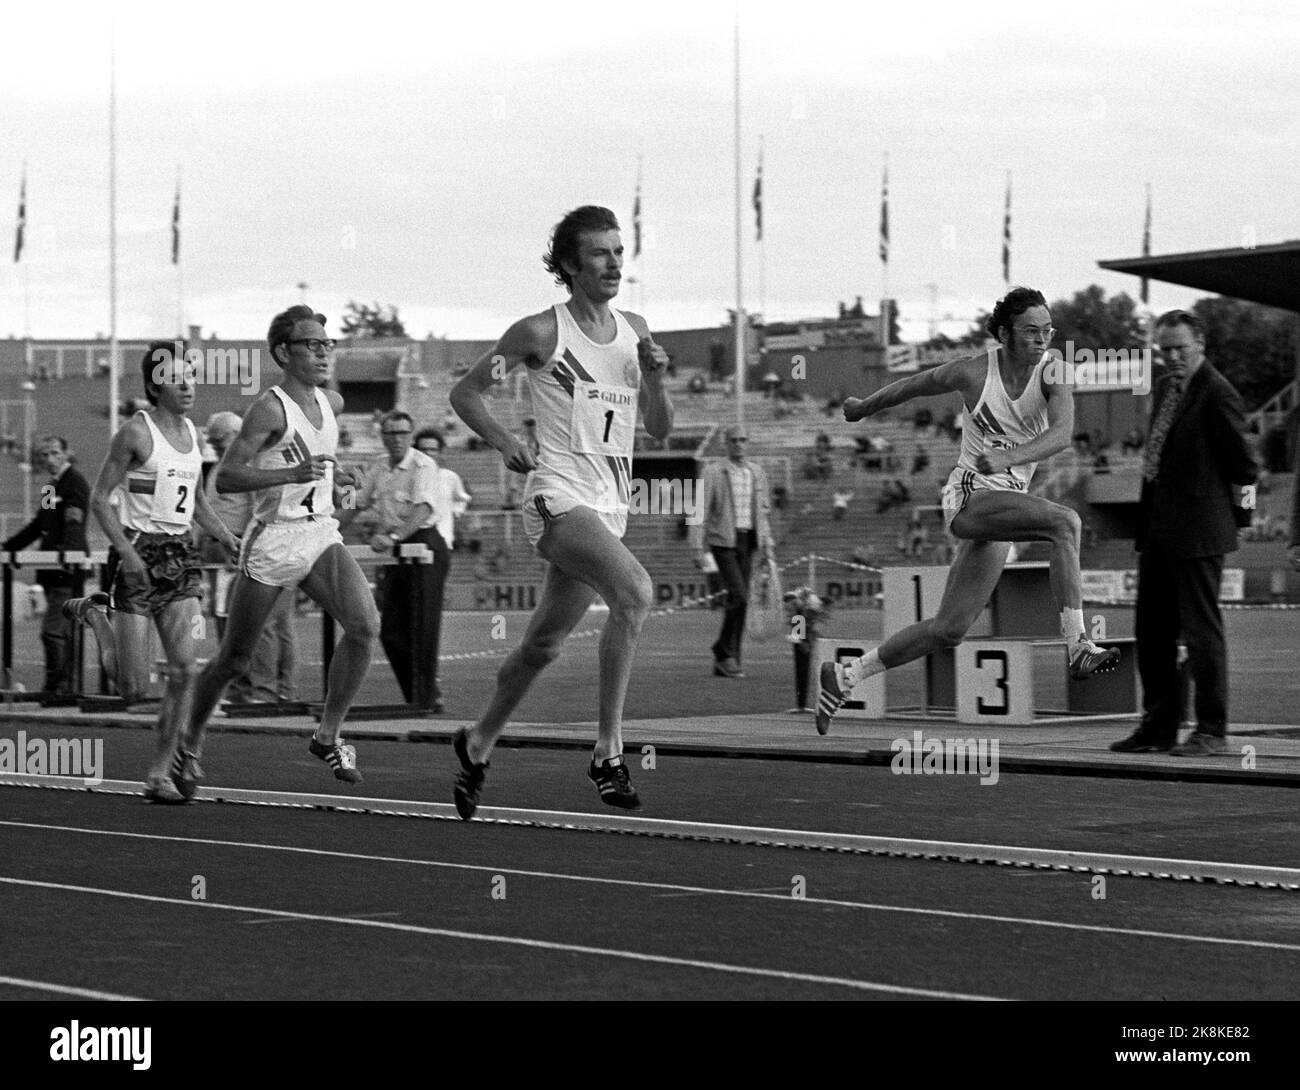 Oslo 197407. Athletics match between Norway, Scotland and Bulgaria at Bislett Stadium. The picture shows two winners in action: t.h. Takes Kristen Fløgstad's SATS in three steps, while Knut Kvalheim leads at 5000 m. Just behind Kvalheim is Arne Risa. Photo Arild Hordnes / NTB / NTB Stock Photo